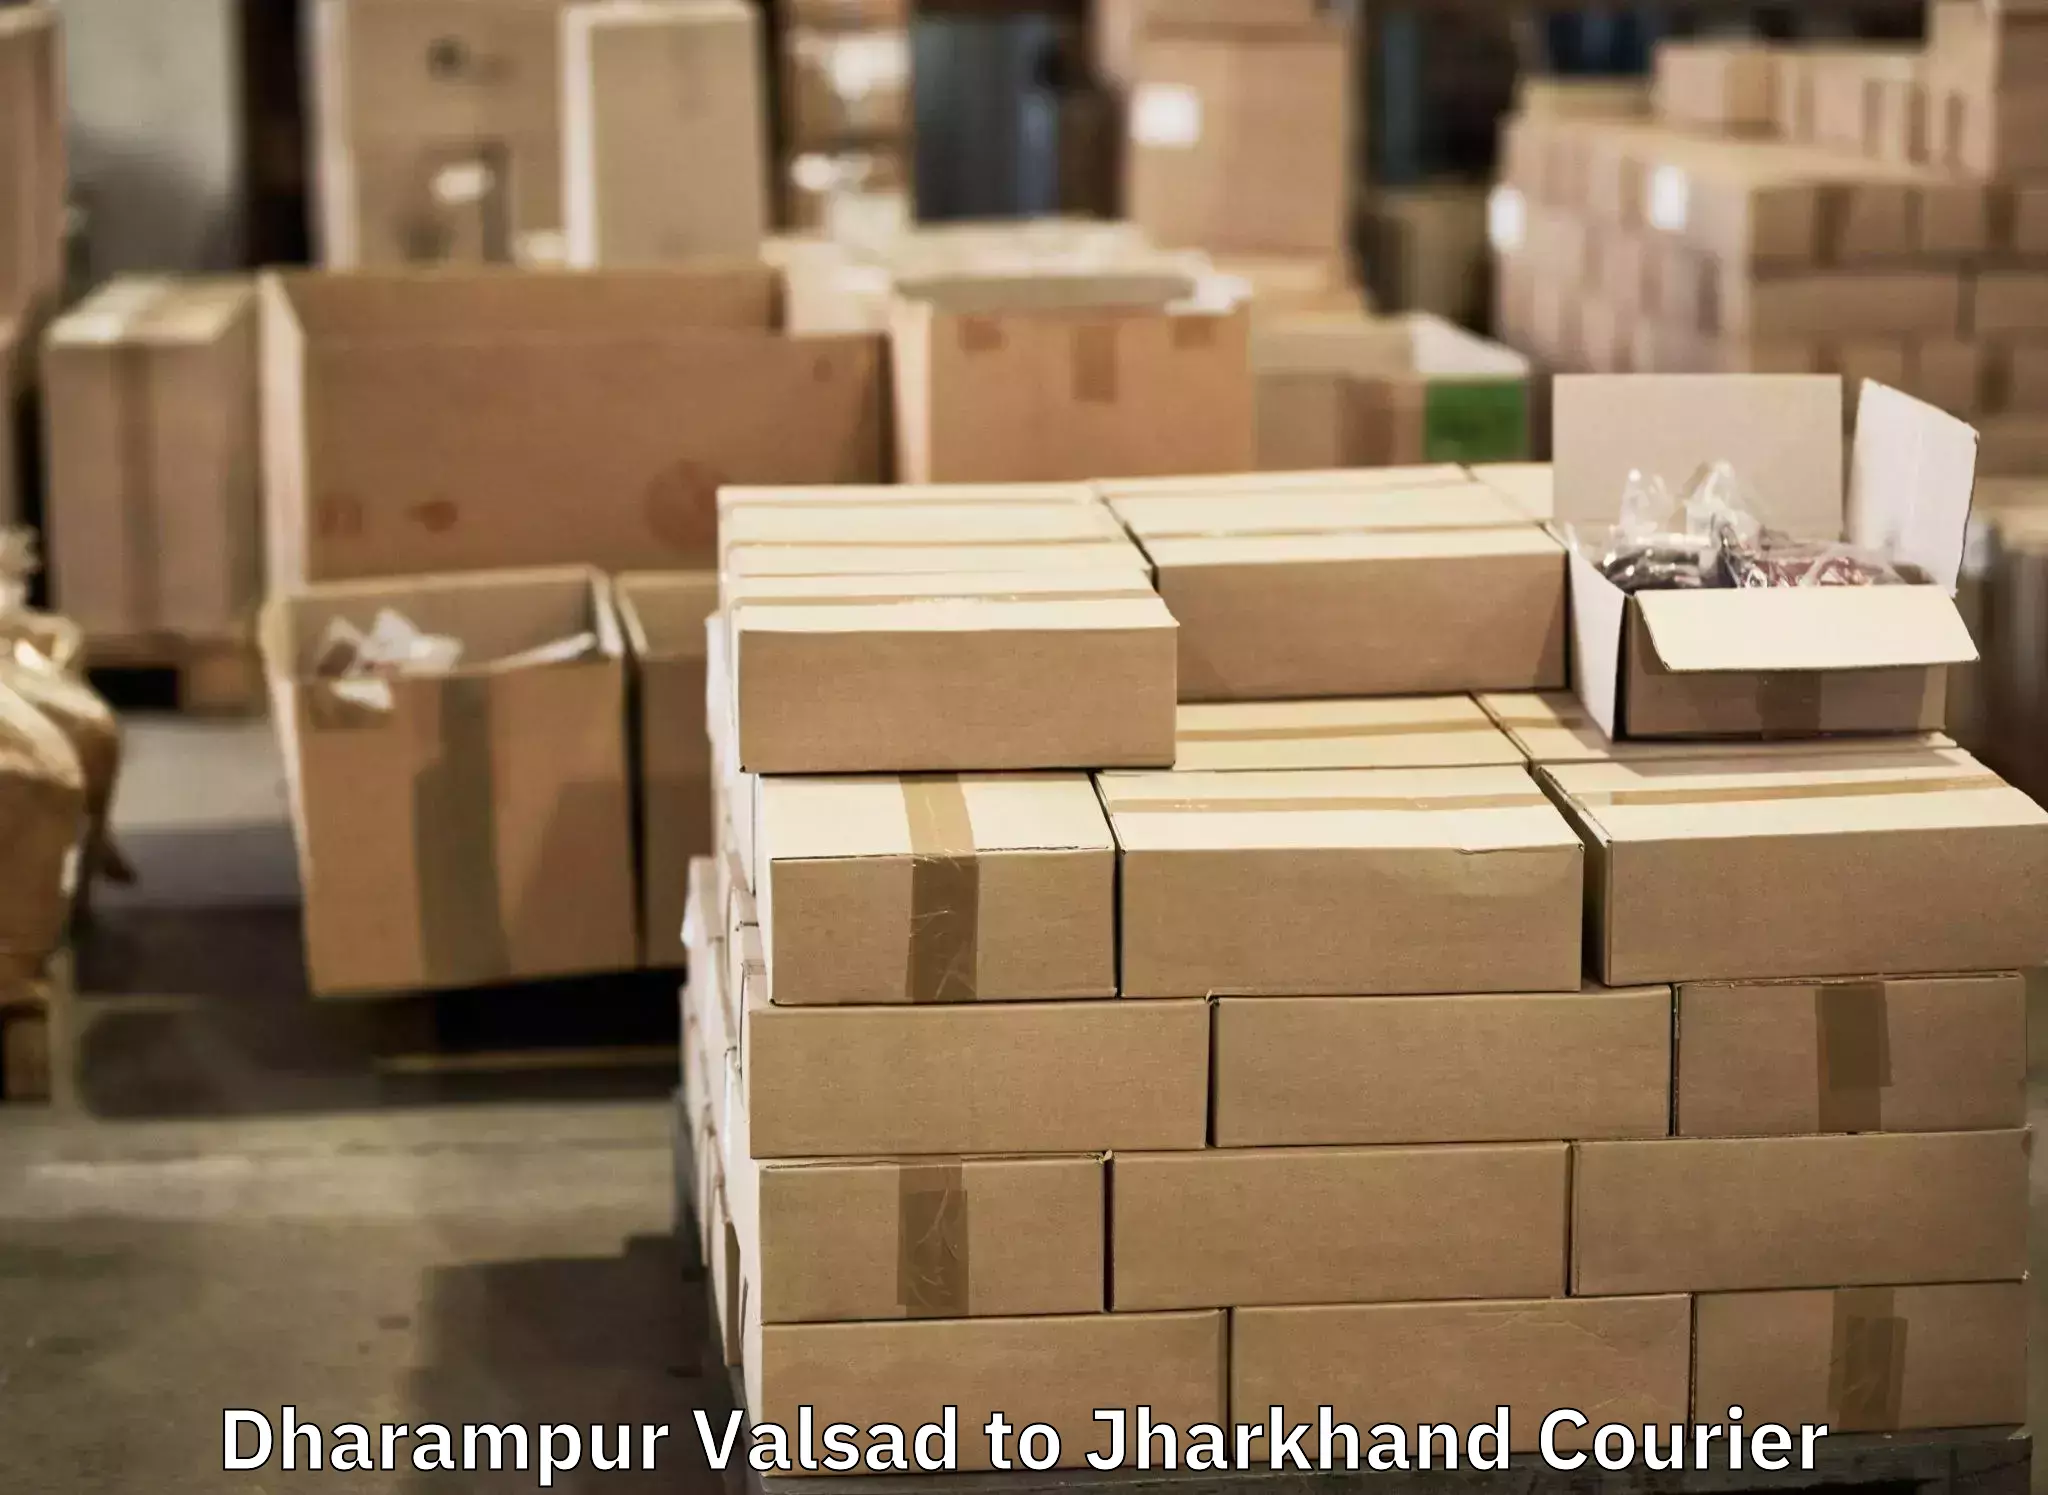 Luggage delivery system Dharampur Valsad to IIT Dhanbad